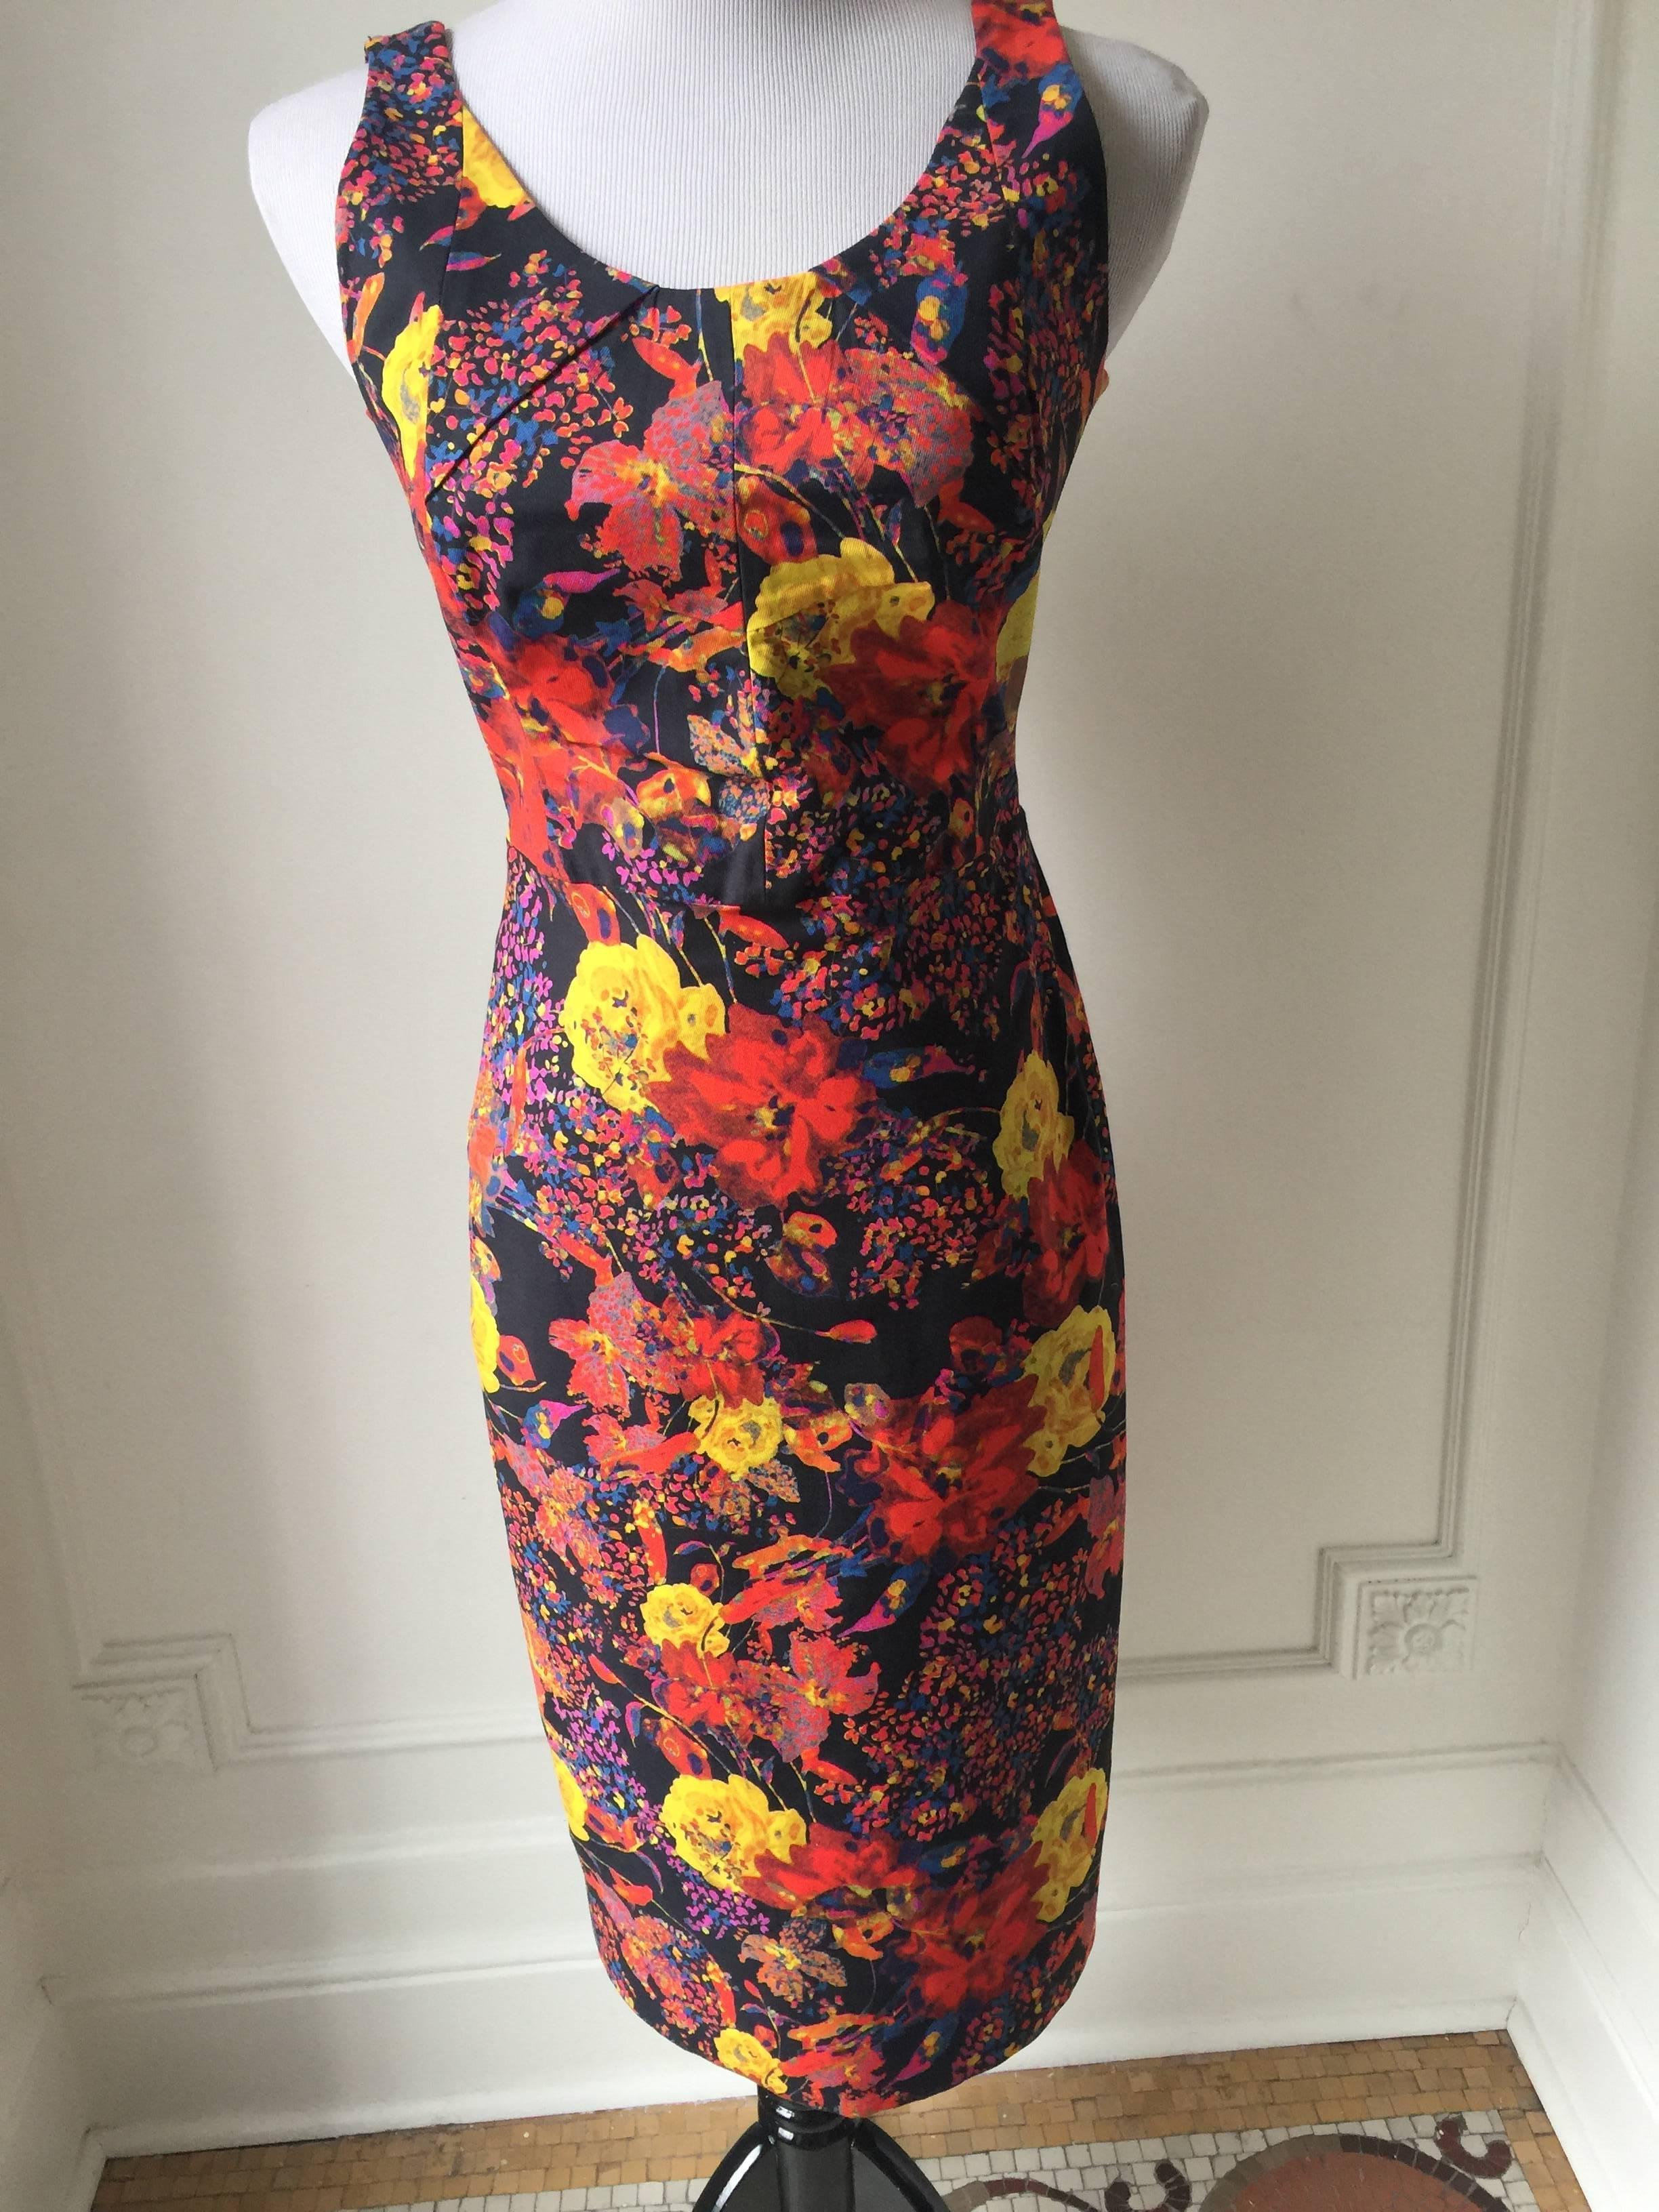 Fitted Floral Sexy Dress by Erdem.
Black ,red and multicolored sleeveless with scoop neckline, and hidden zipper in the back...
Wonderful little dress for this spring and summer.